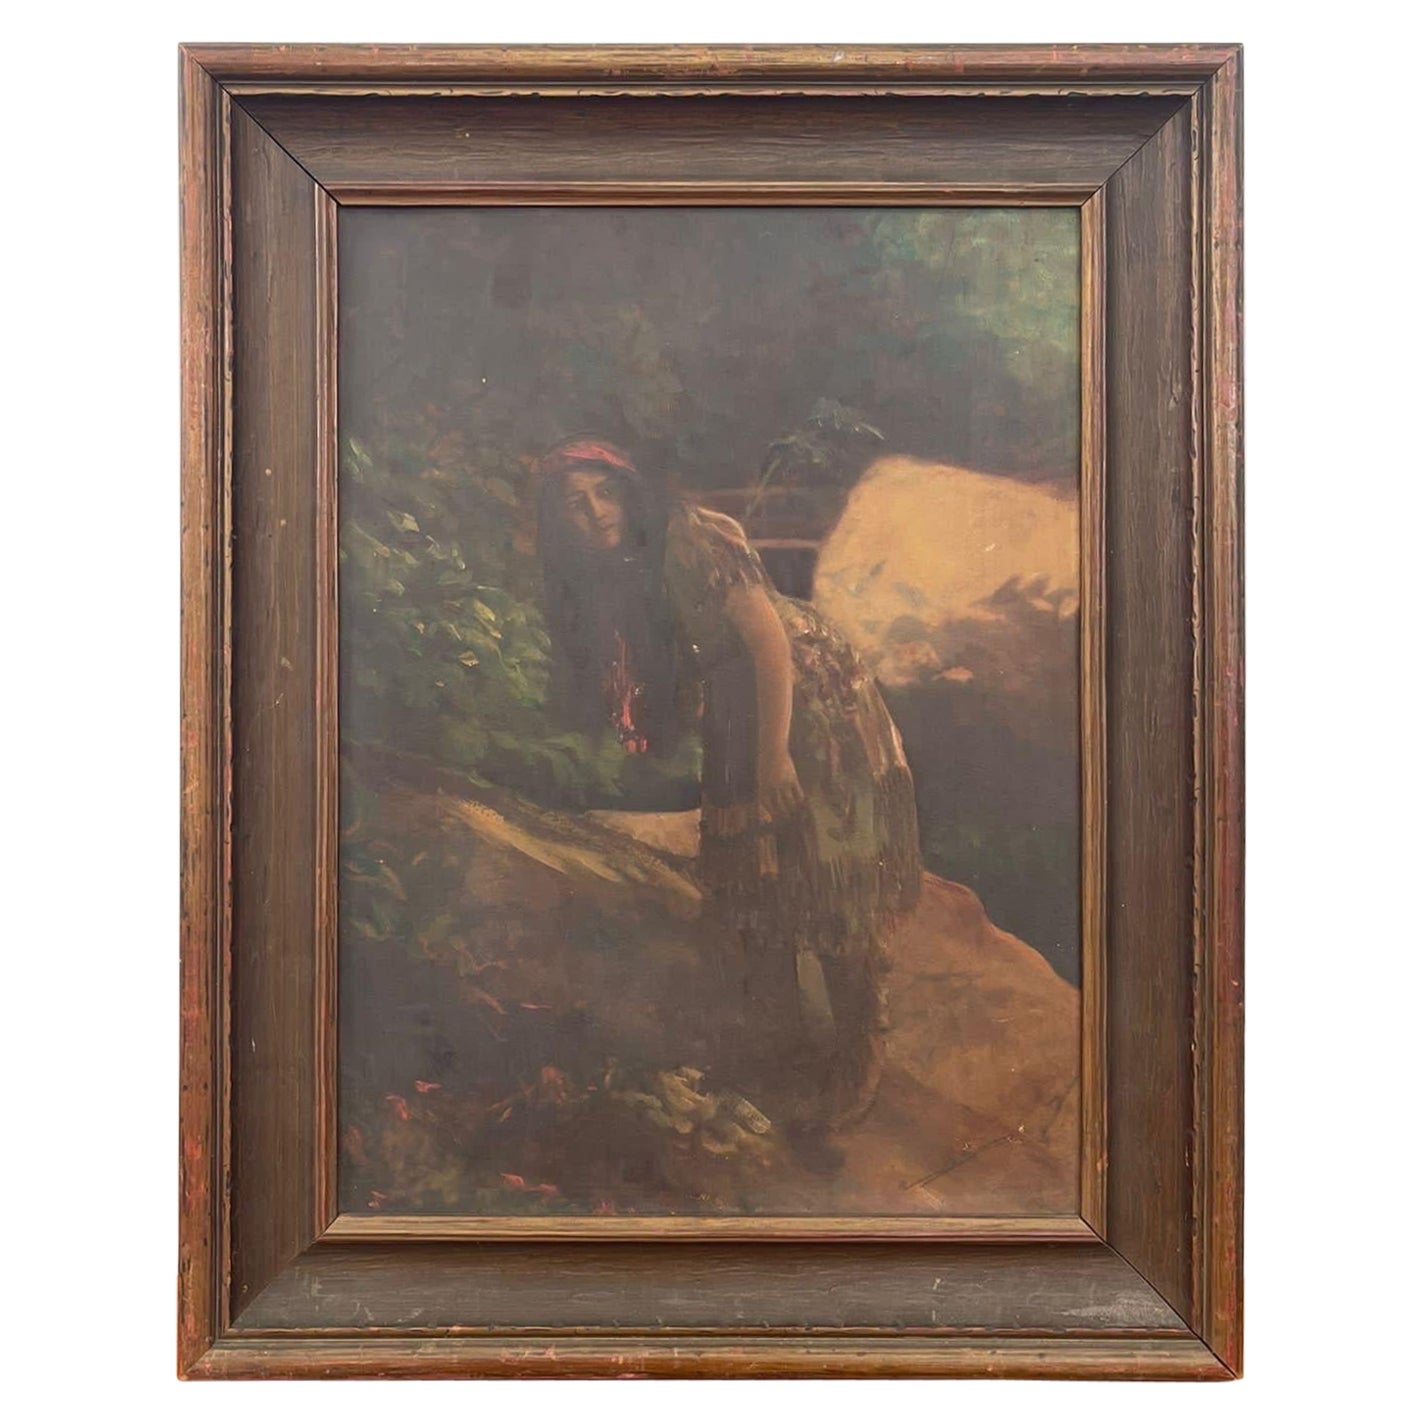 Vintage Framed Lithograph of Woman With Hand Painted Highlights.